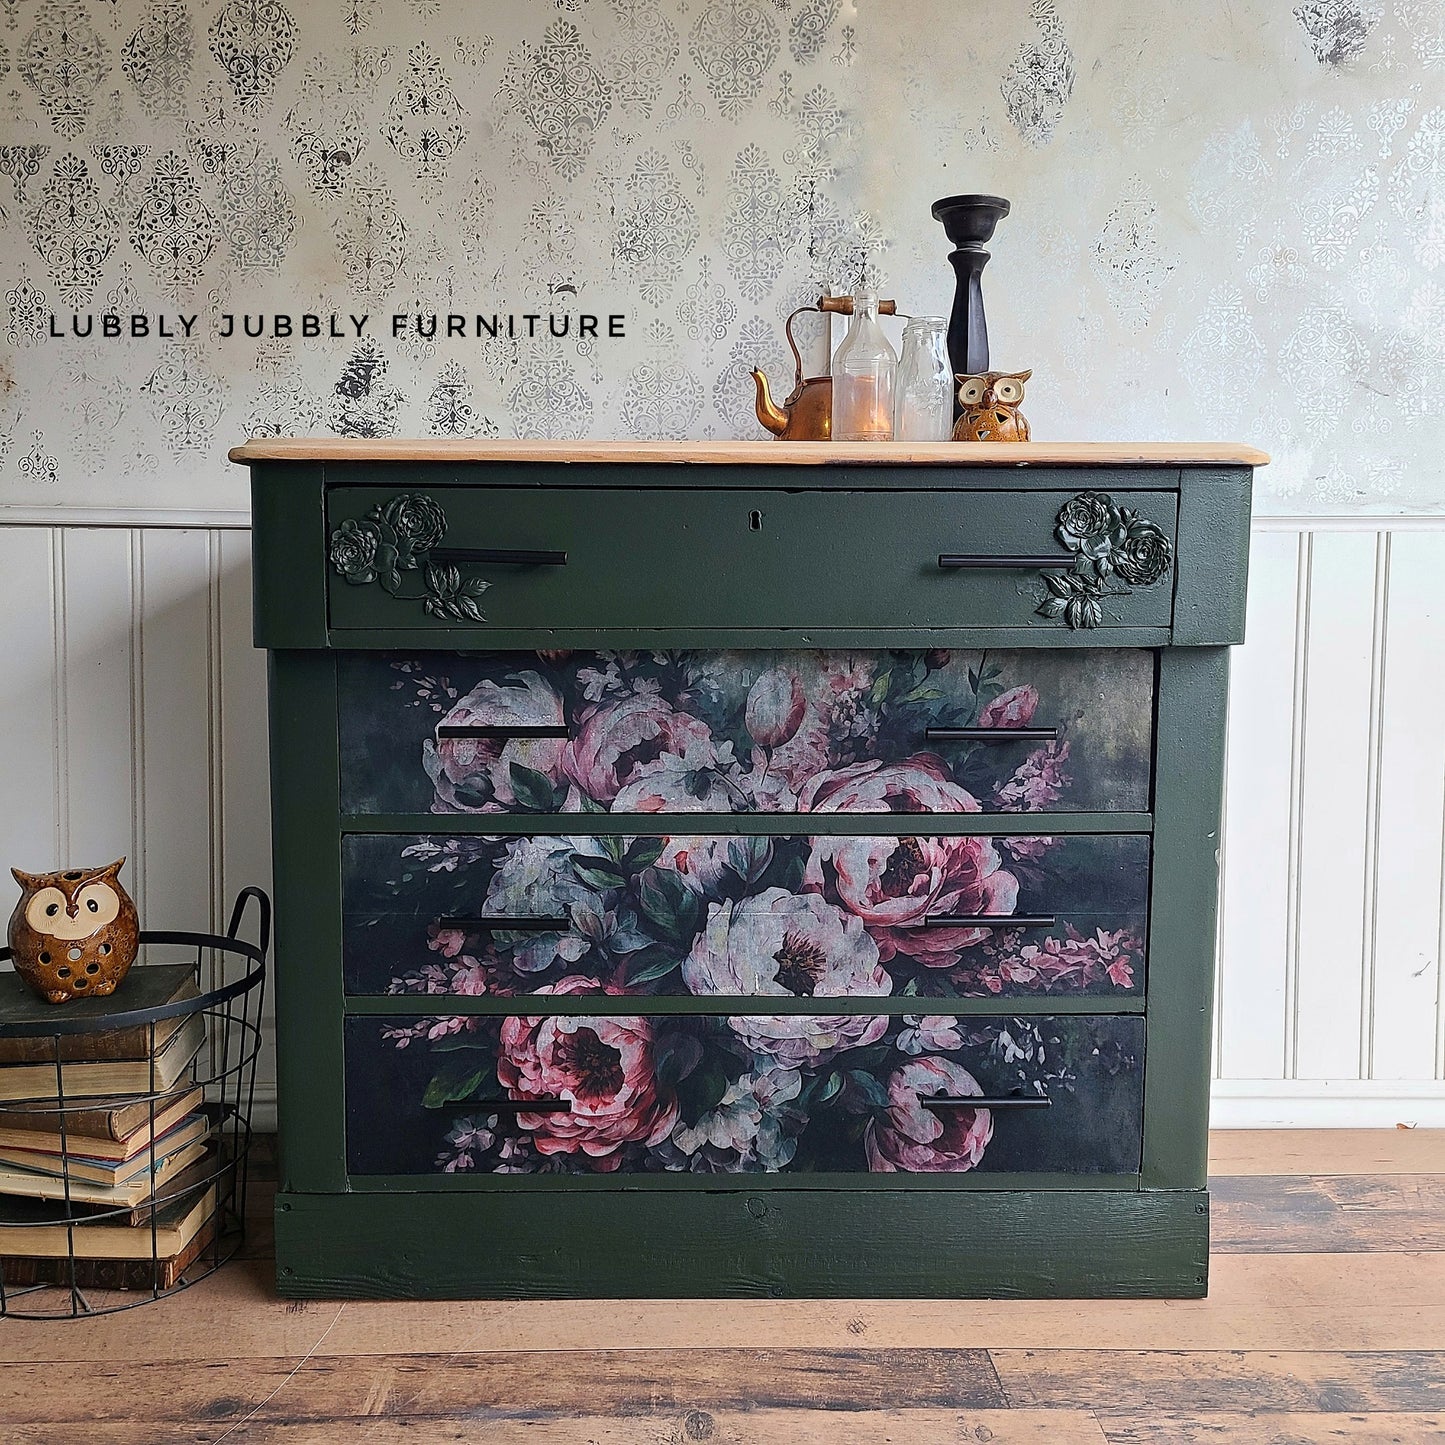 Mossy Rose Delight A1 Fiber Decoupage Paper Redesign with Prima 23.4"x33.1" - Same Day Shipping - Furniture Decoupage